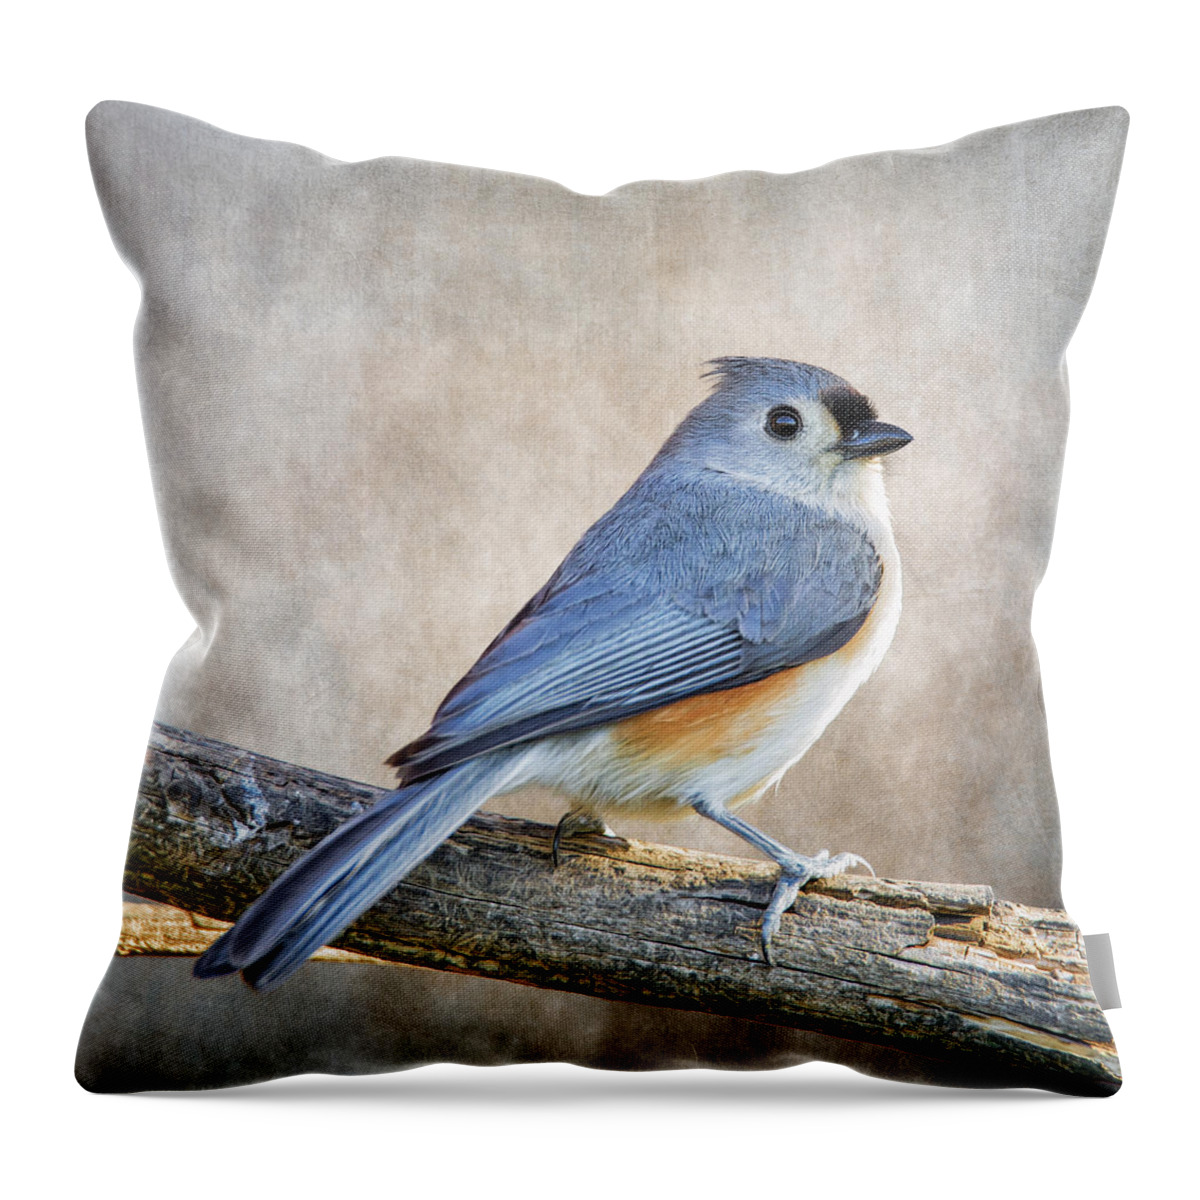 Baeolophus Throw Pillow featuring the photograph Tufty Strikes A Pose on Branch by Bill and Linda Tiepelman